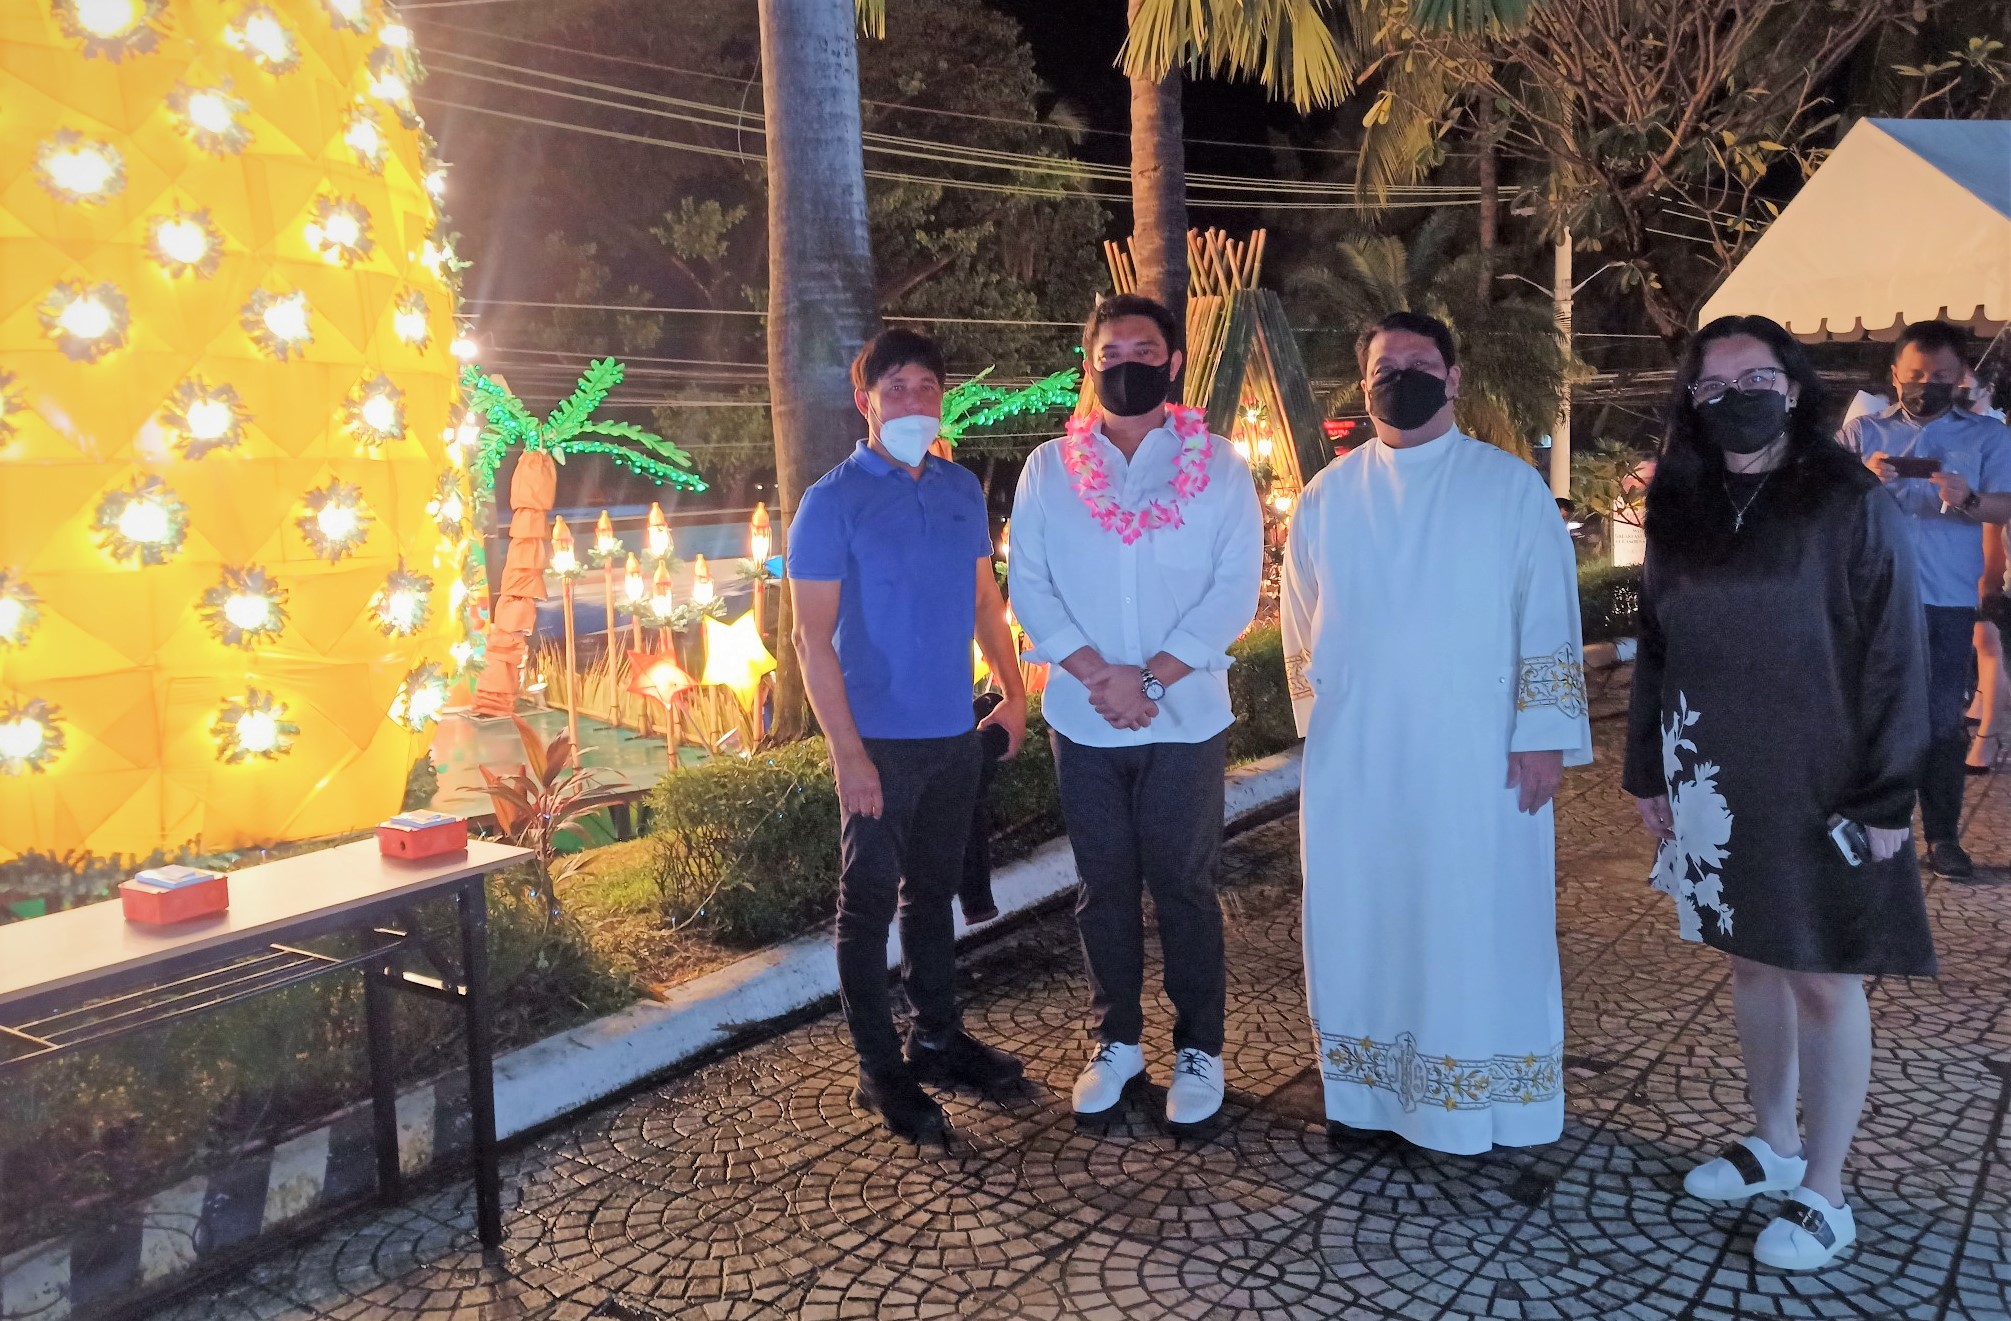 SBMA Chairman and Administrator switches on the lights to illuminate the giant pineapple Christmas display at the Subic Bay Yacht Club on Friday